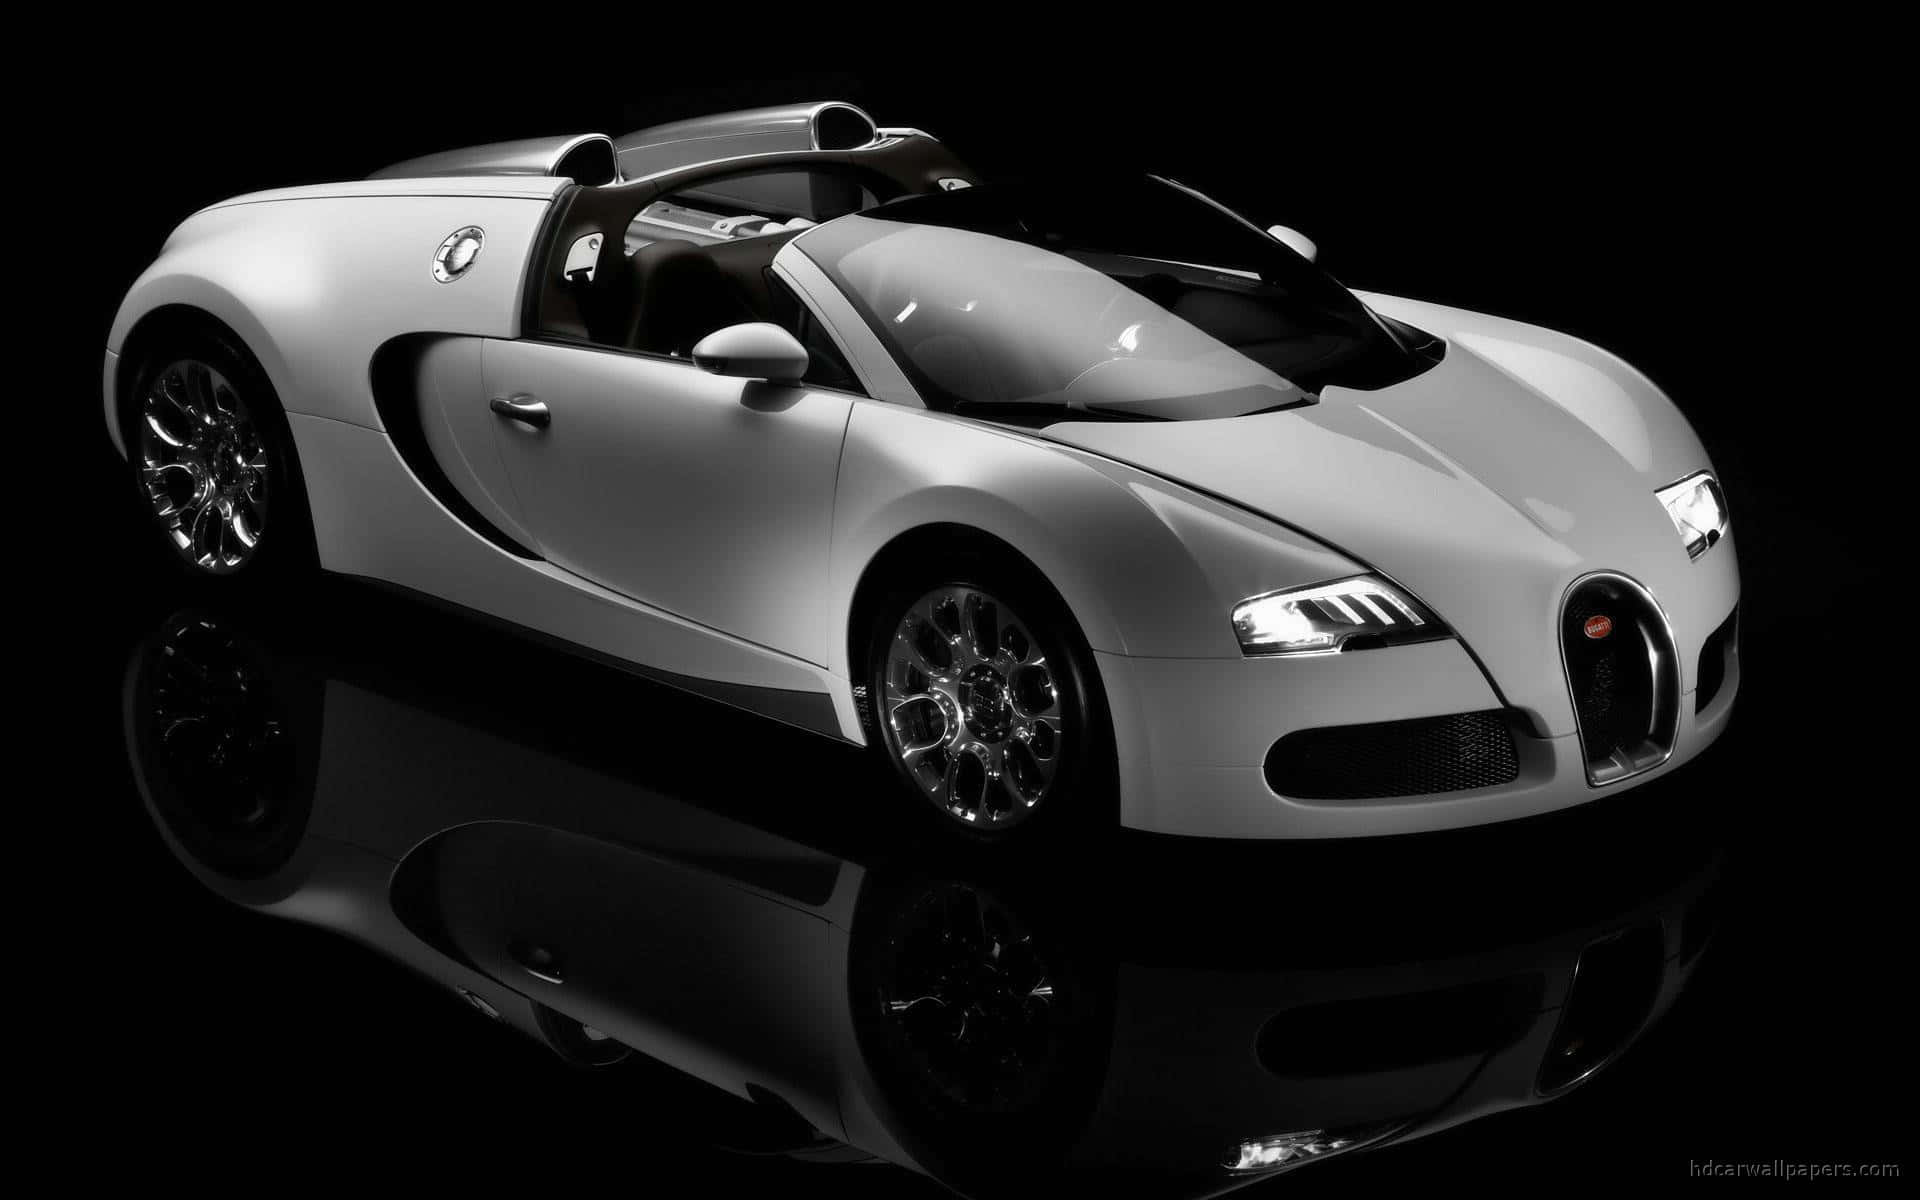 Behold the majesty of the iconic Bugatti car. Wallpaper